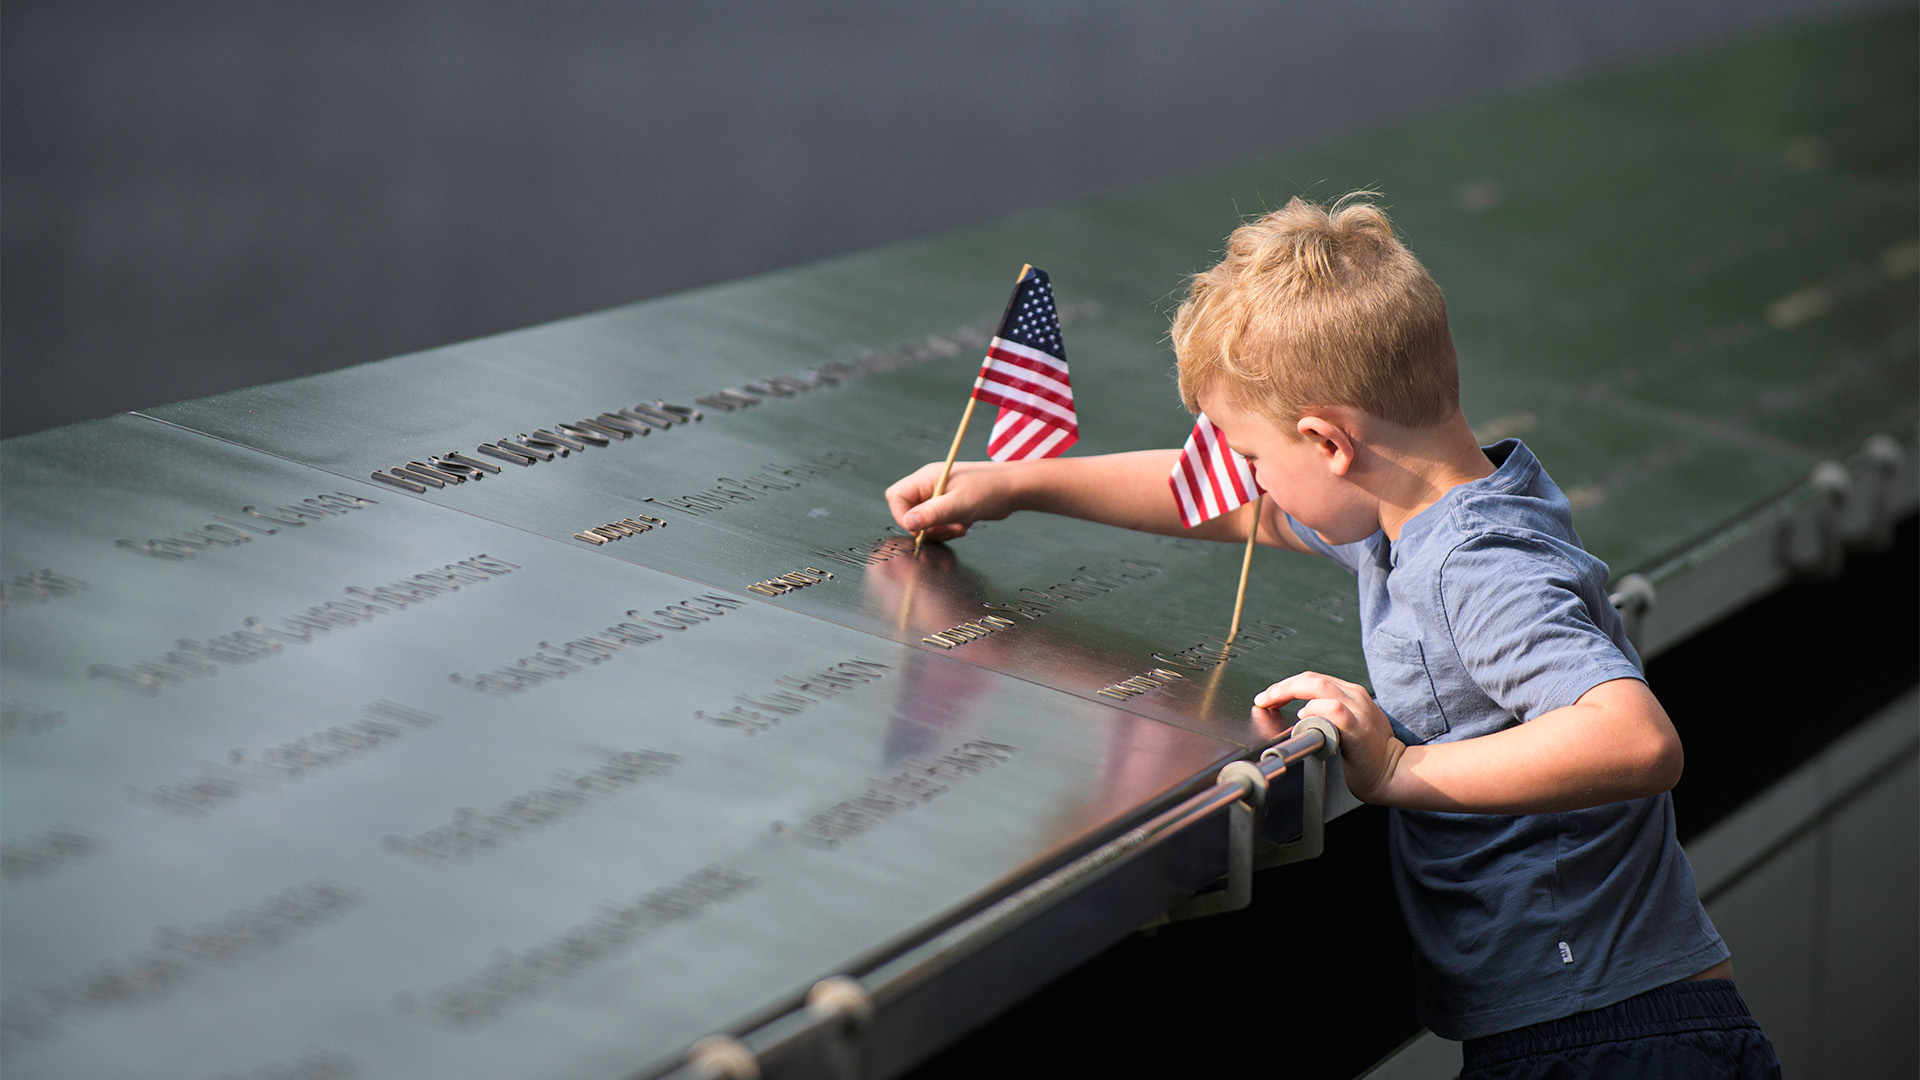 A small, light-haired child touches the 9/11 Memorial and a small American flag placed at one of the victim's names